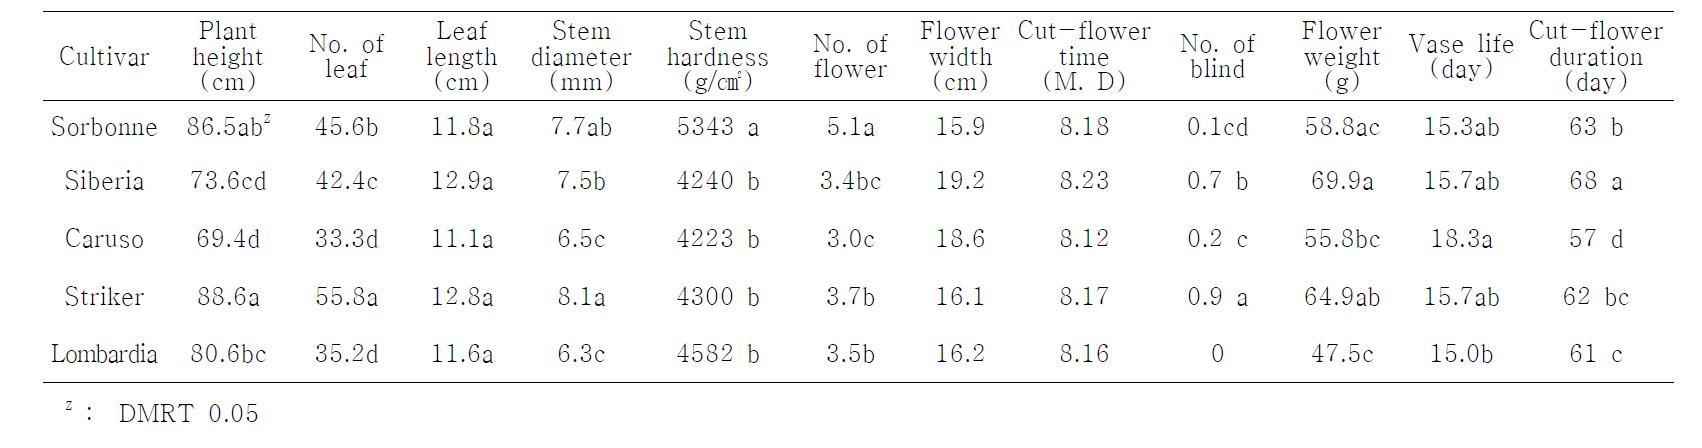 Comparison of plant growth and cut-flower character at planting time(6.16) of oriental lily hybrid new cultivar('10)